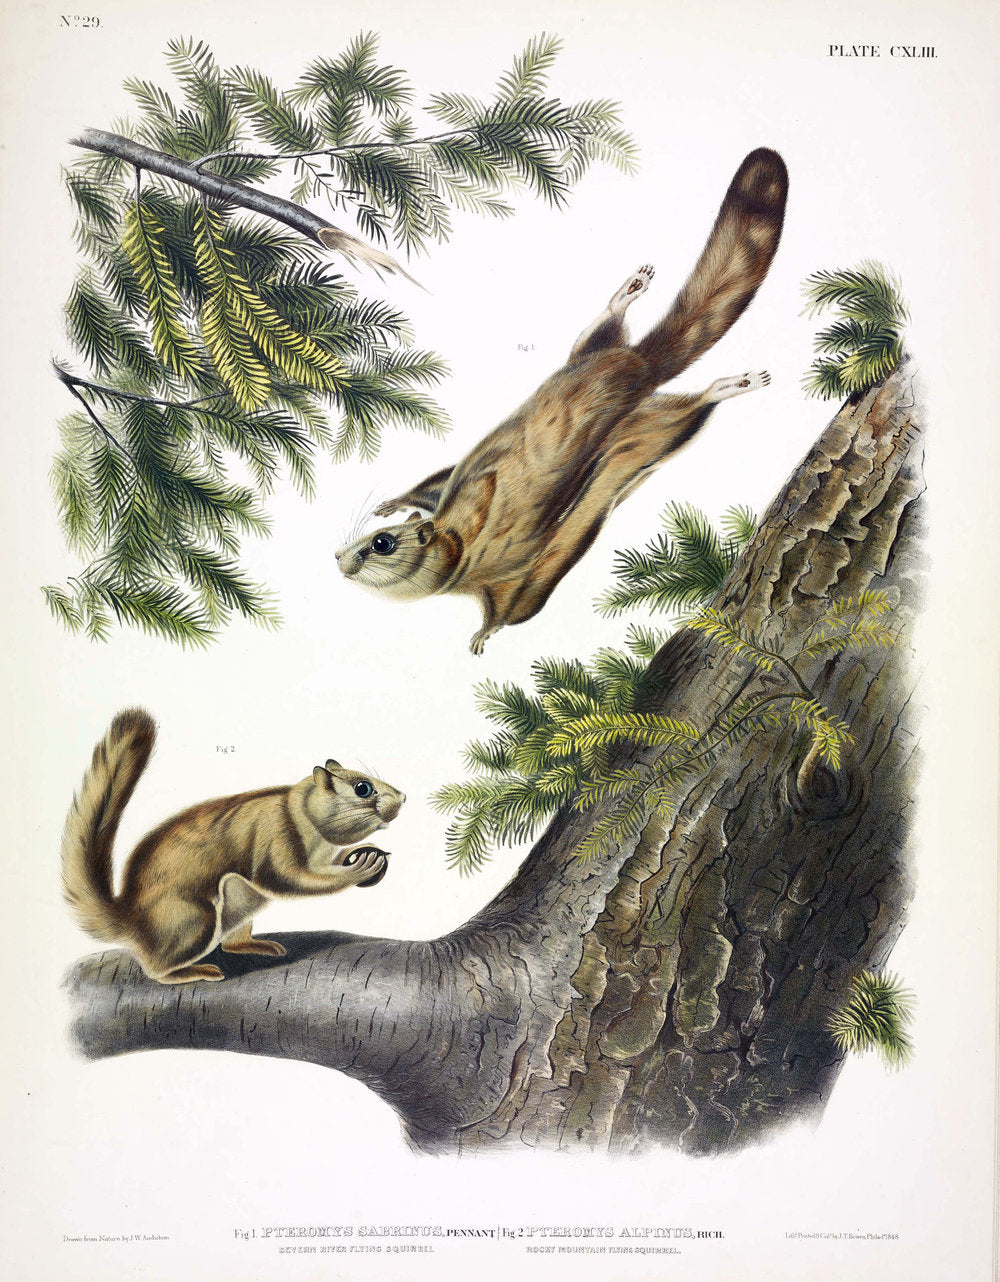 Painted by John James Audubon (1785-1851) with background likely by Victor Gifford Audubon (1809-1860)  Plate CXXXXIII - Severn River Flying Squirrel  From: Viviparous Quadrupeds of North America  New York: 1845-1848  Hand colored lithograph  Sheet size: 21 ¼” x 27”